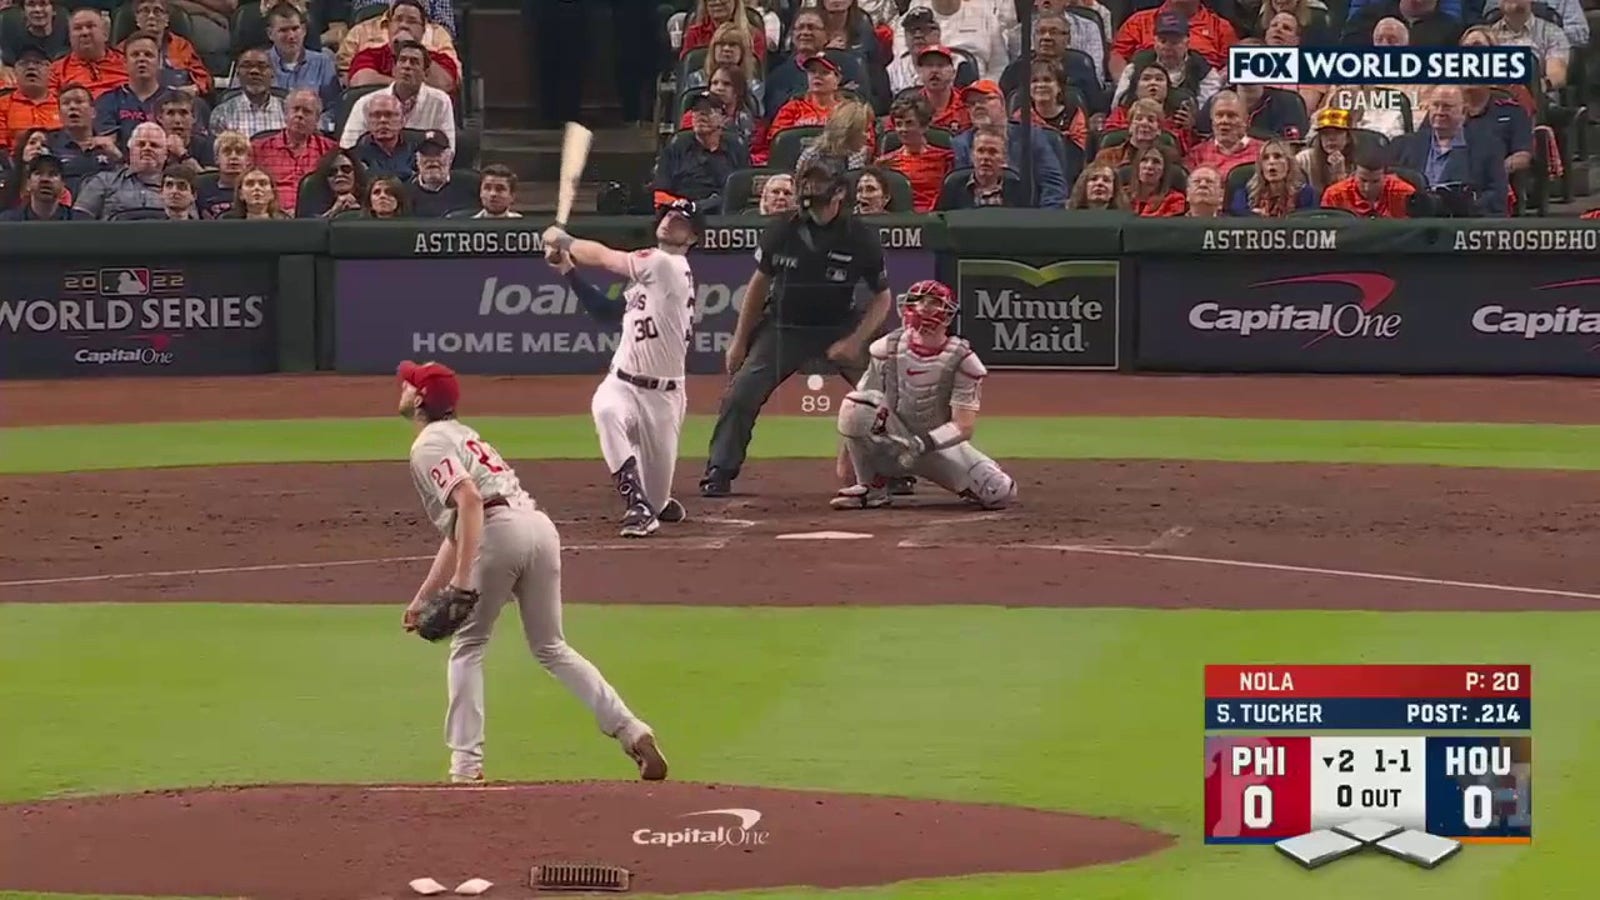 Kyle Tucker puts the Astros on the board with the first World Series homer